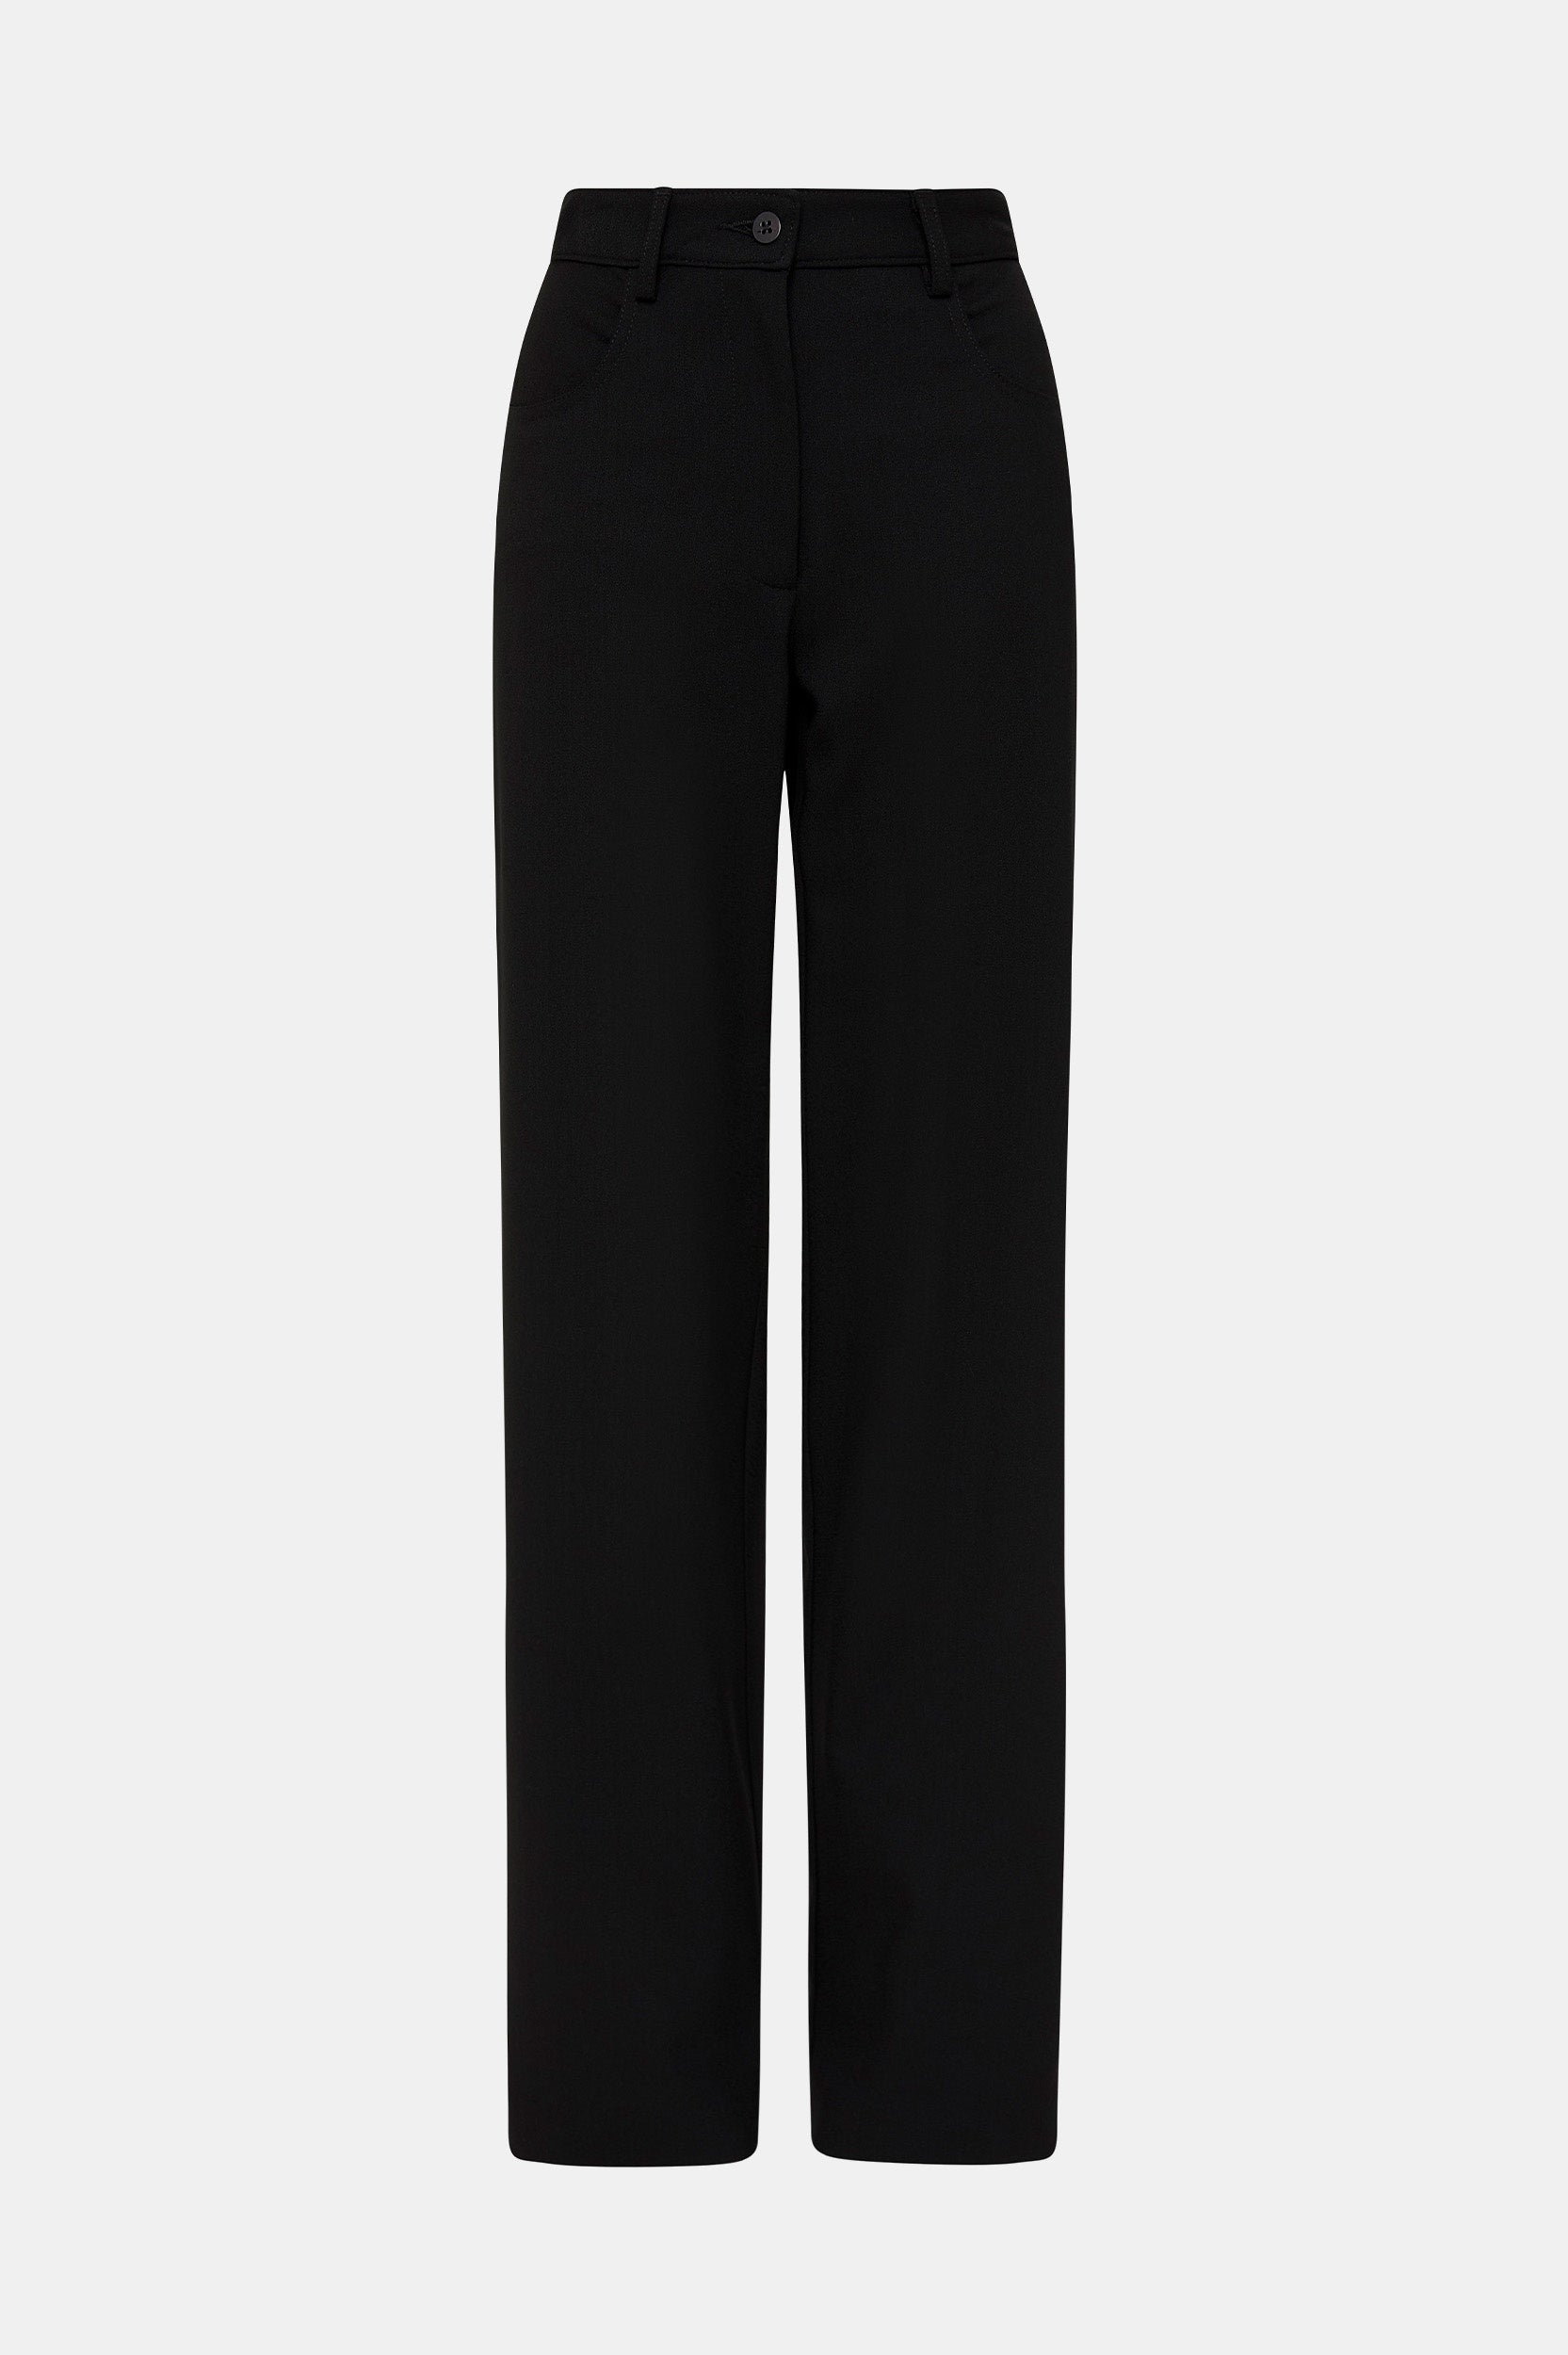 Relaxed Crepe Pant in Black